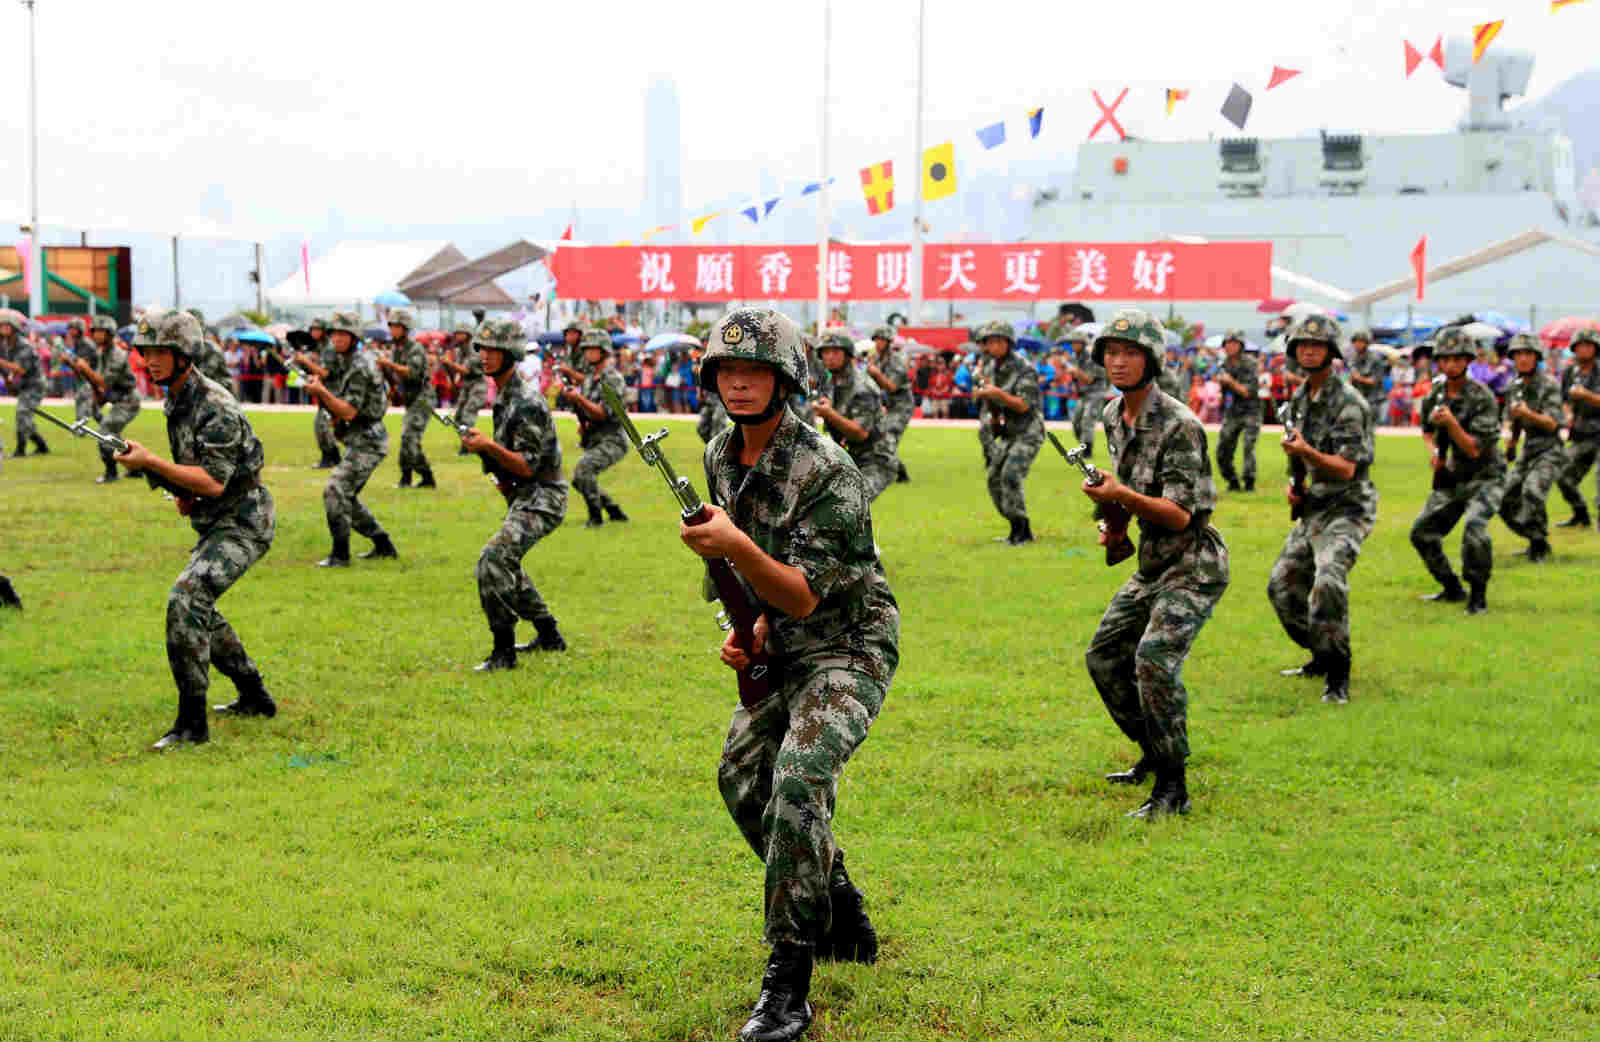 The soldiers of the PLA Hong Kong Garrison demonstrate for the visitors on the camp-open day in the Ngong Shuen Chau Barracks. In order to celebrate the 20th anniversary of Hong Kong's return to the motherland, the Ngong Shuen Chau Barracks of the PLA Hong Kong Garrison held the camp-open day activities on the morning of July 8, 2017. (eng.chinamil.com.cn/Photo by Zhou Hanqing)